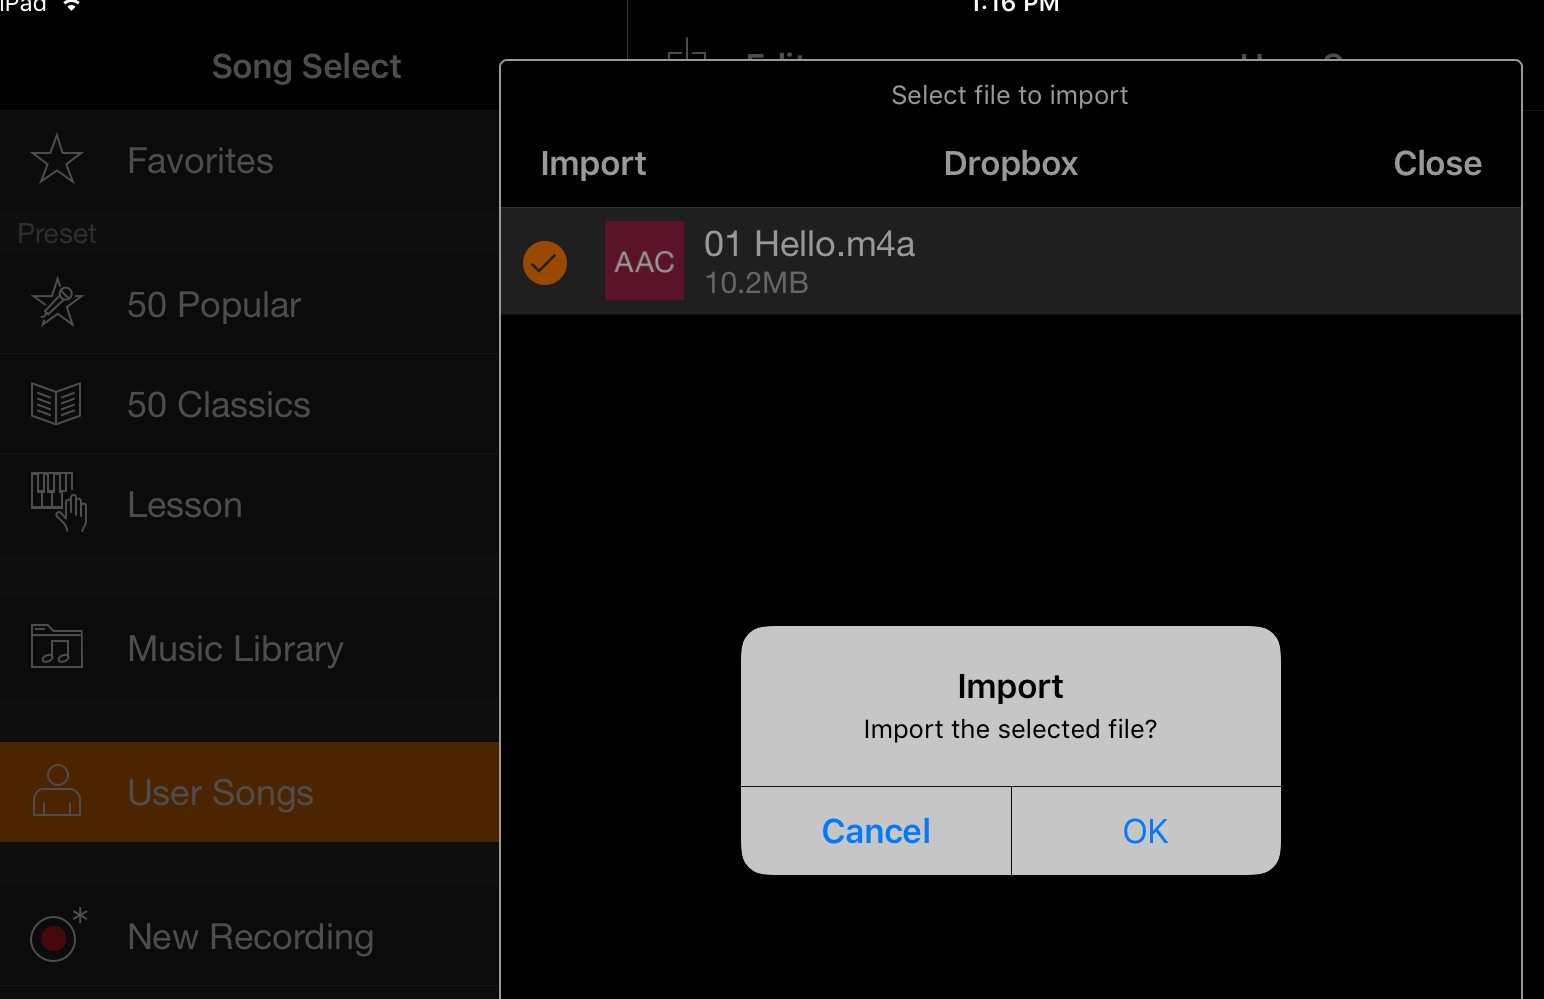 An image displaying the dialogue box triggered when importing folders or files from Dropbox.